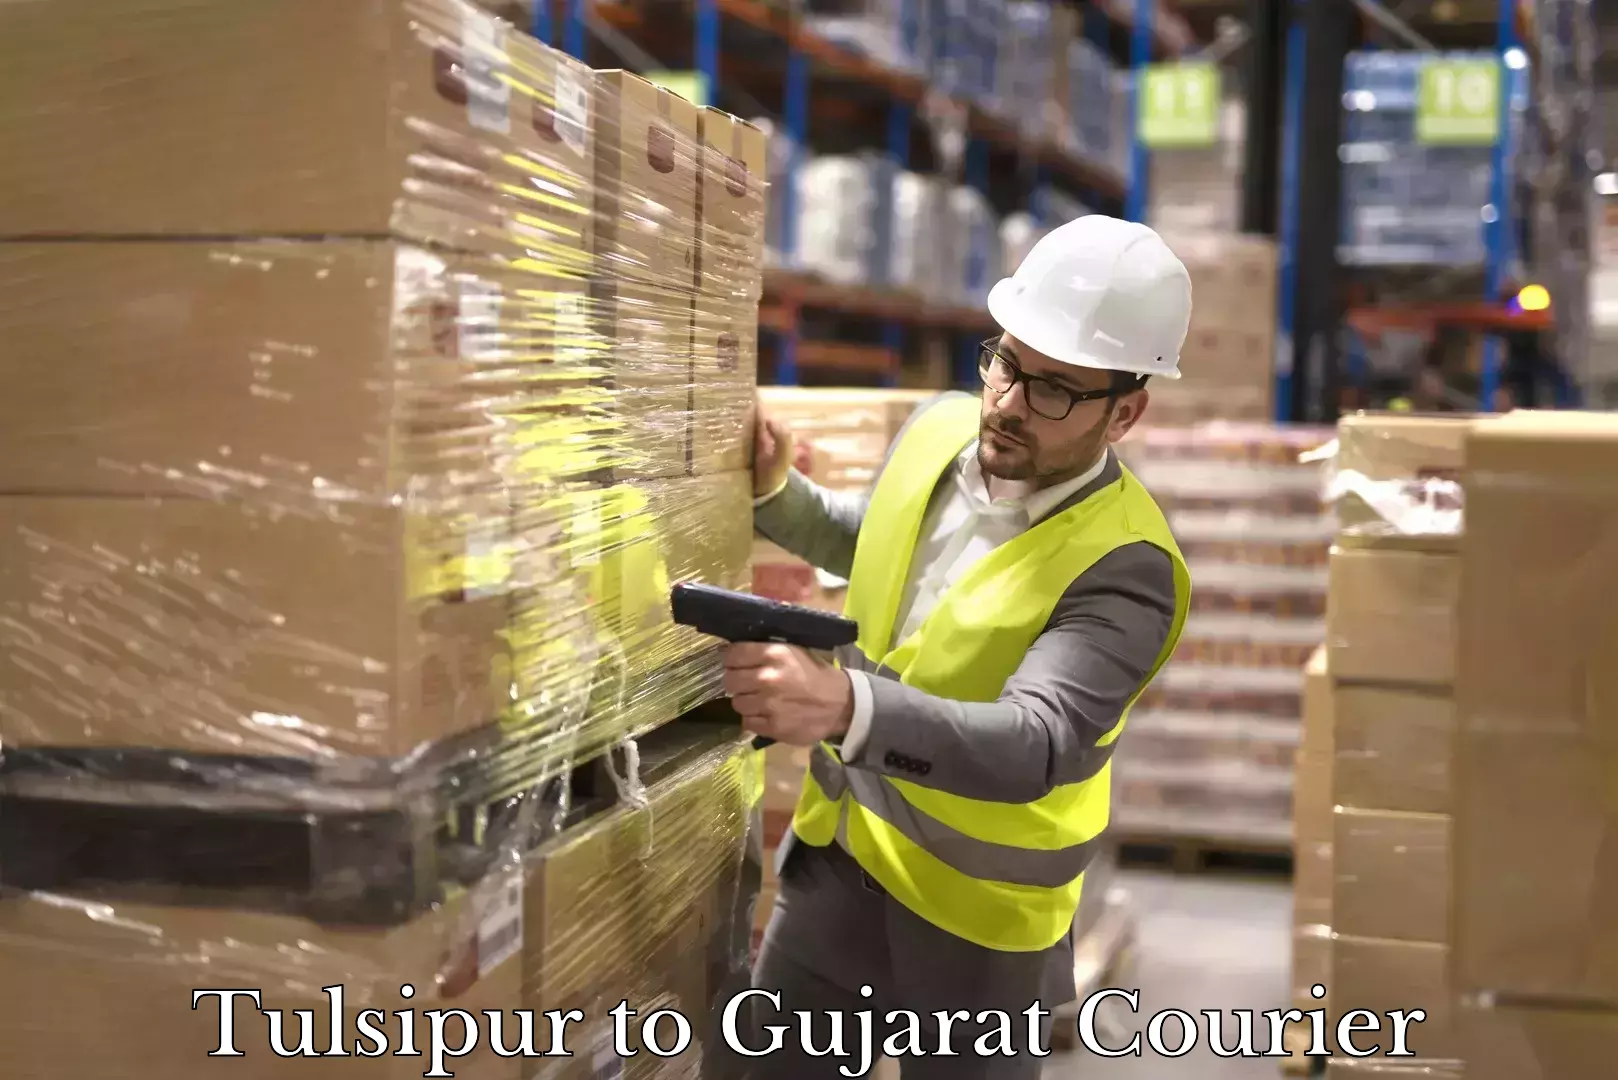 On-call courier service Tulsipur to Gujarat